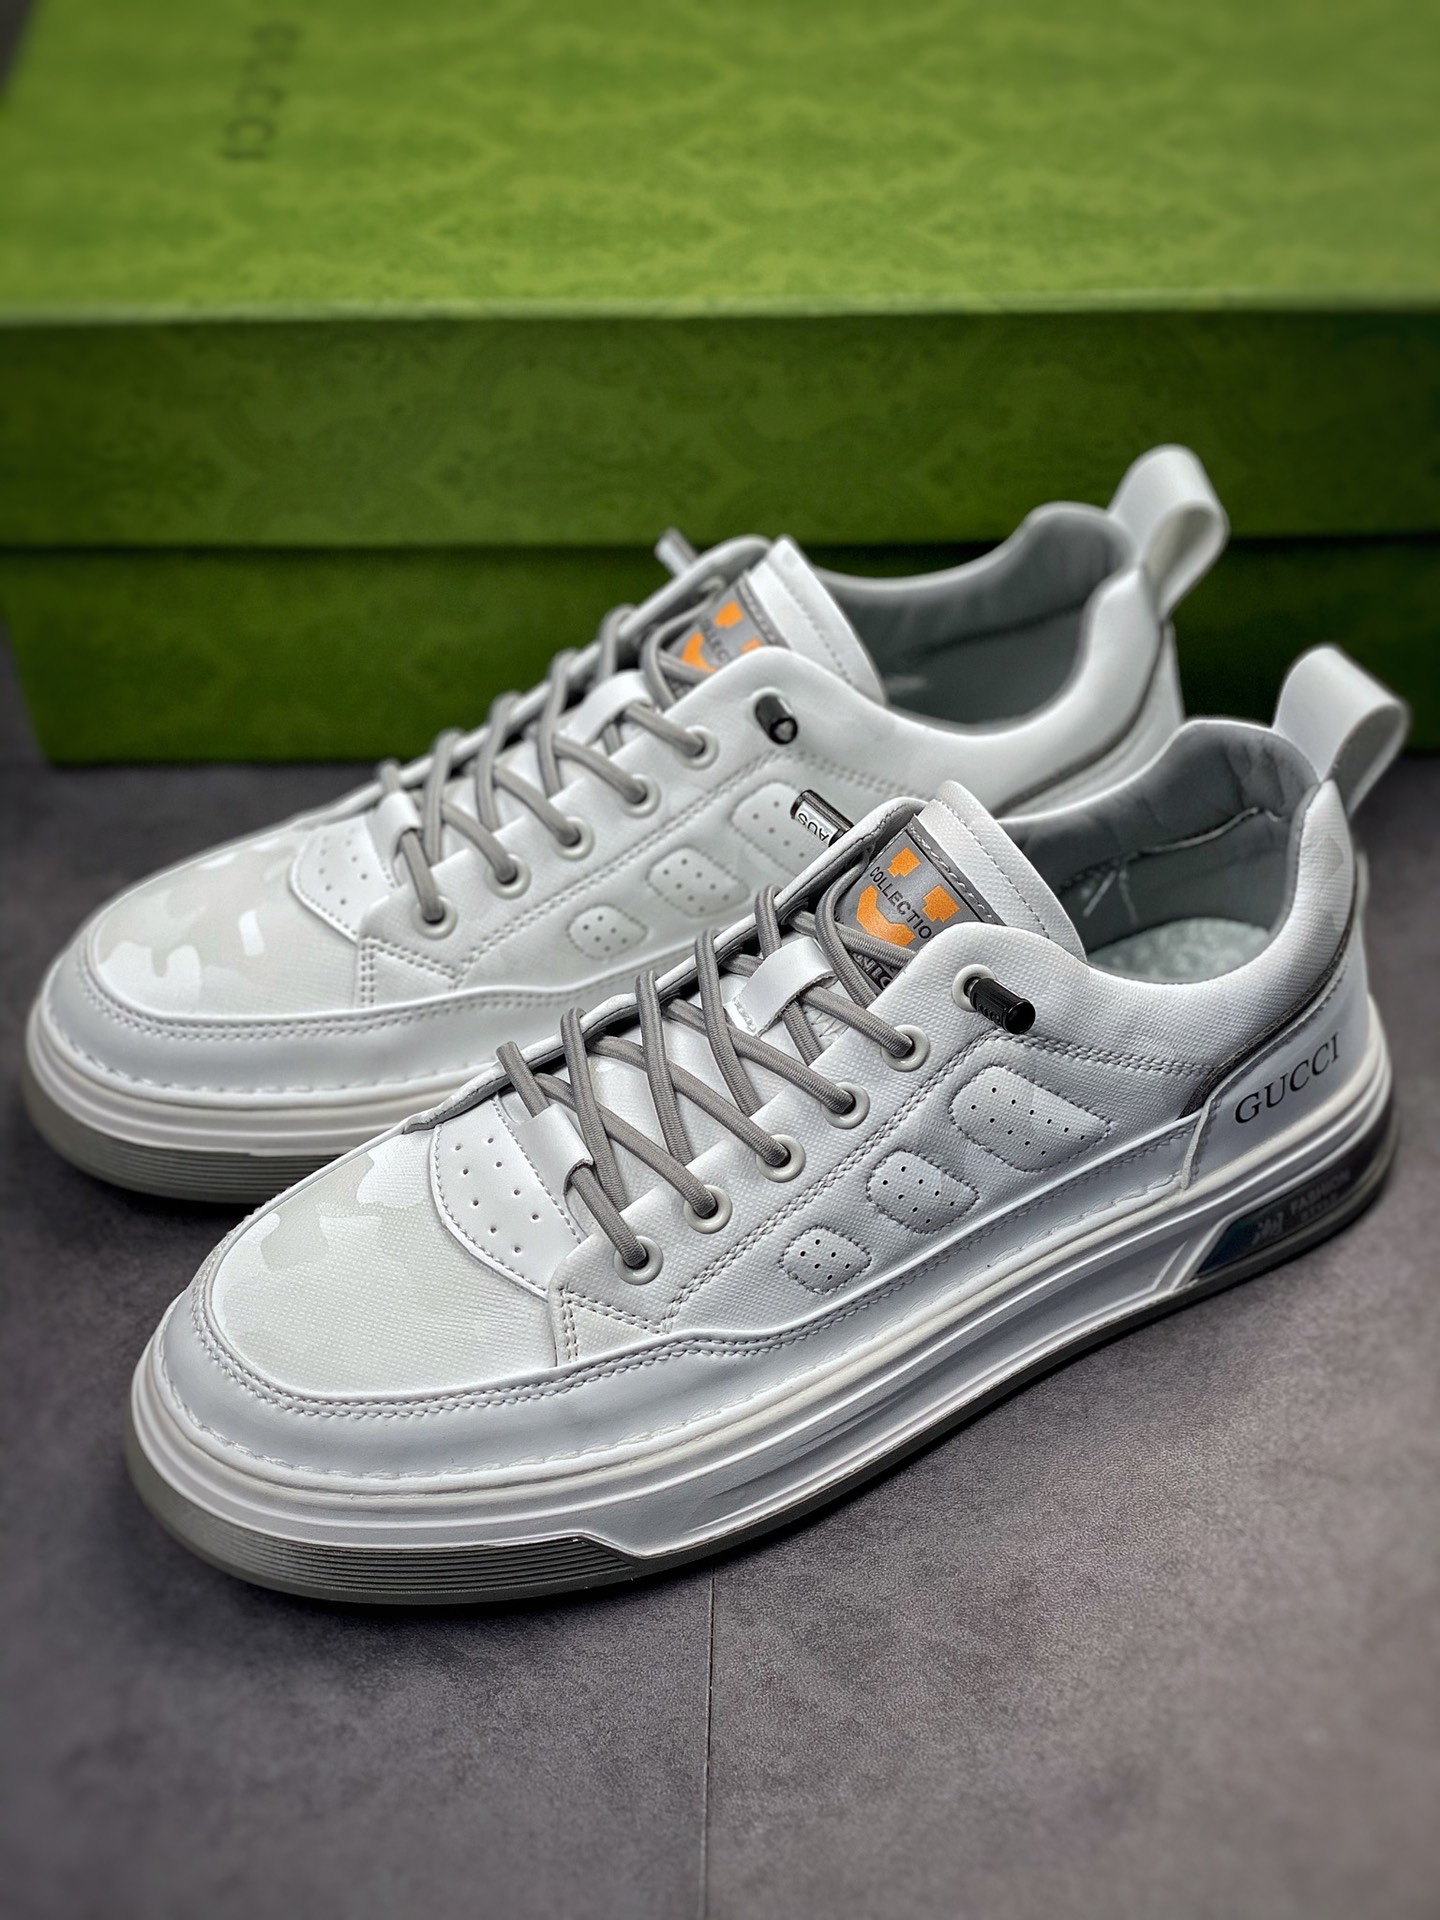 Gucci sports and leisure trend sneakers series